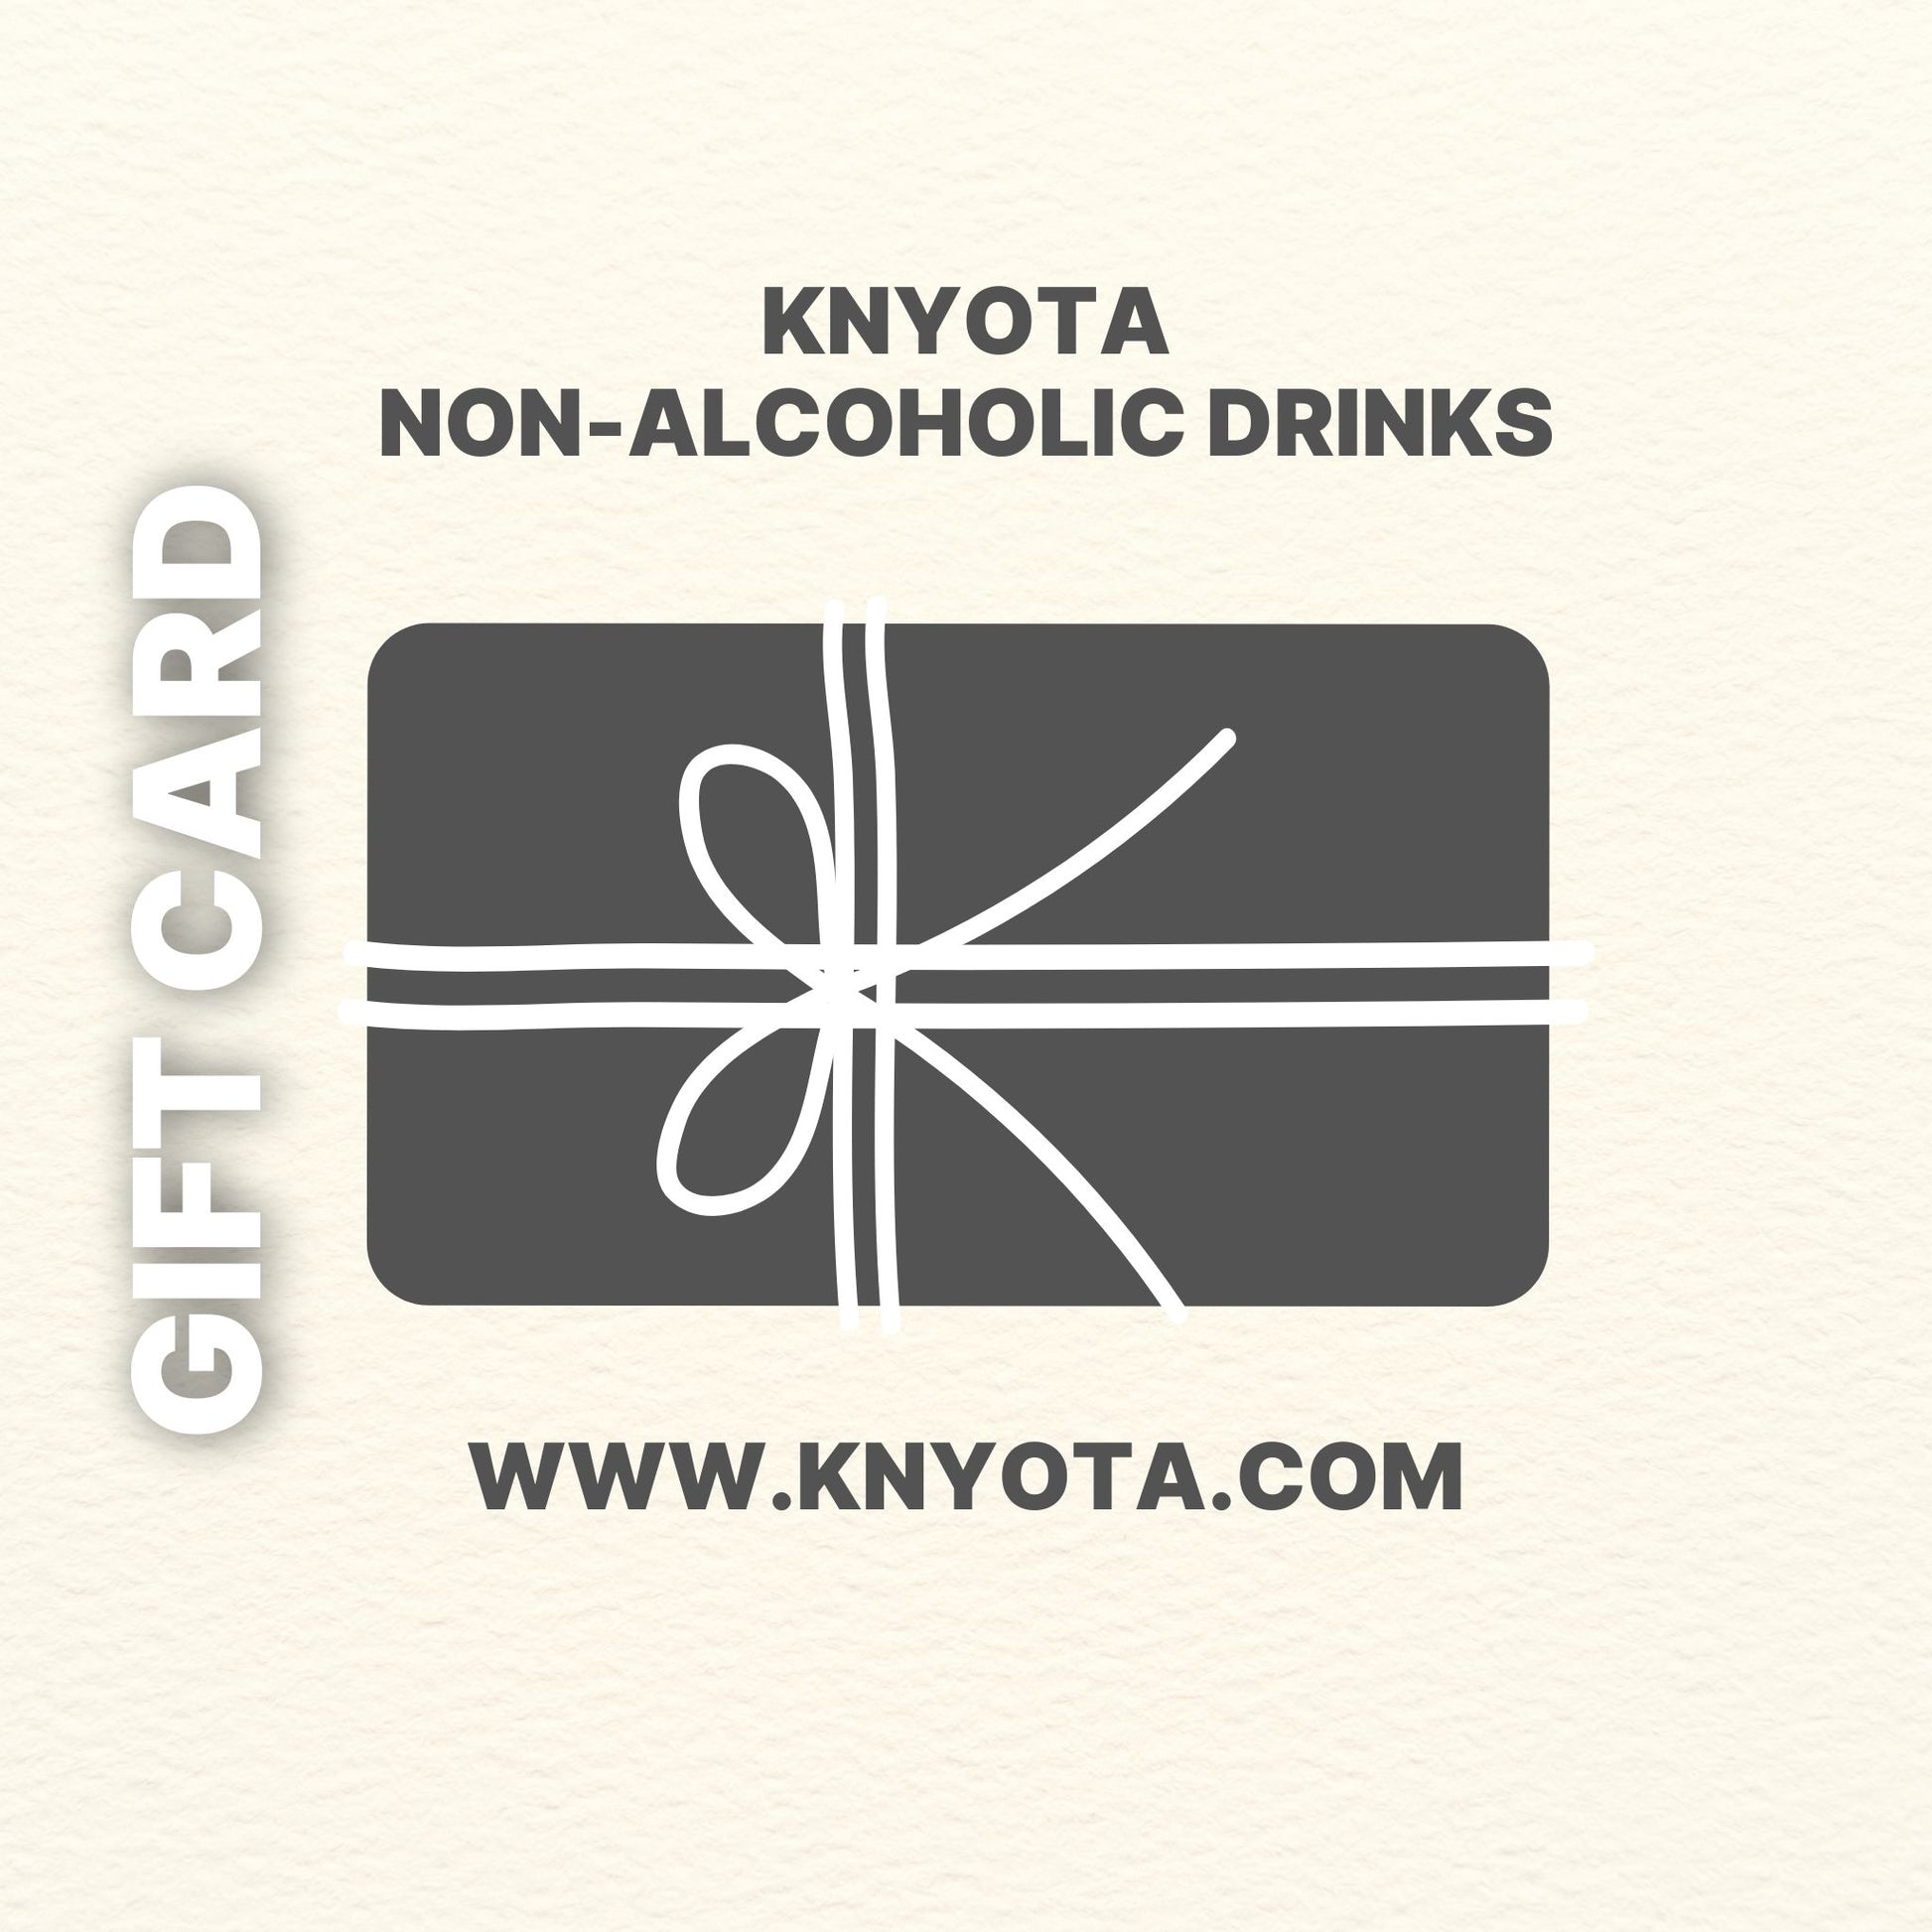 KNYOTA Non-Alcoholic Drinks Gift Card is valid online or in-store.